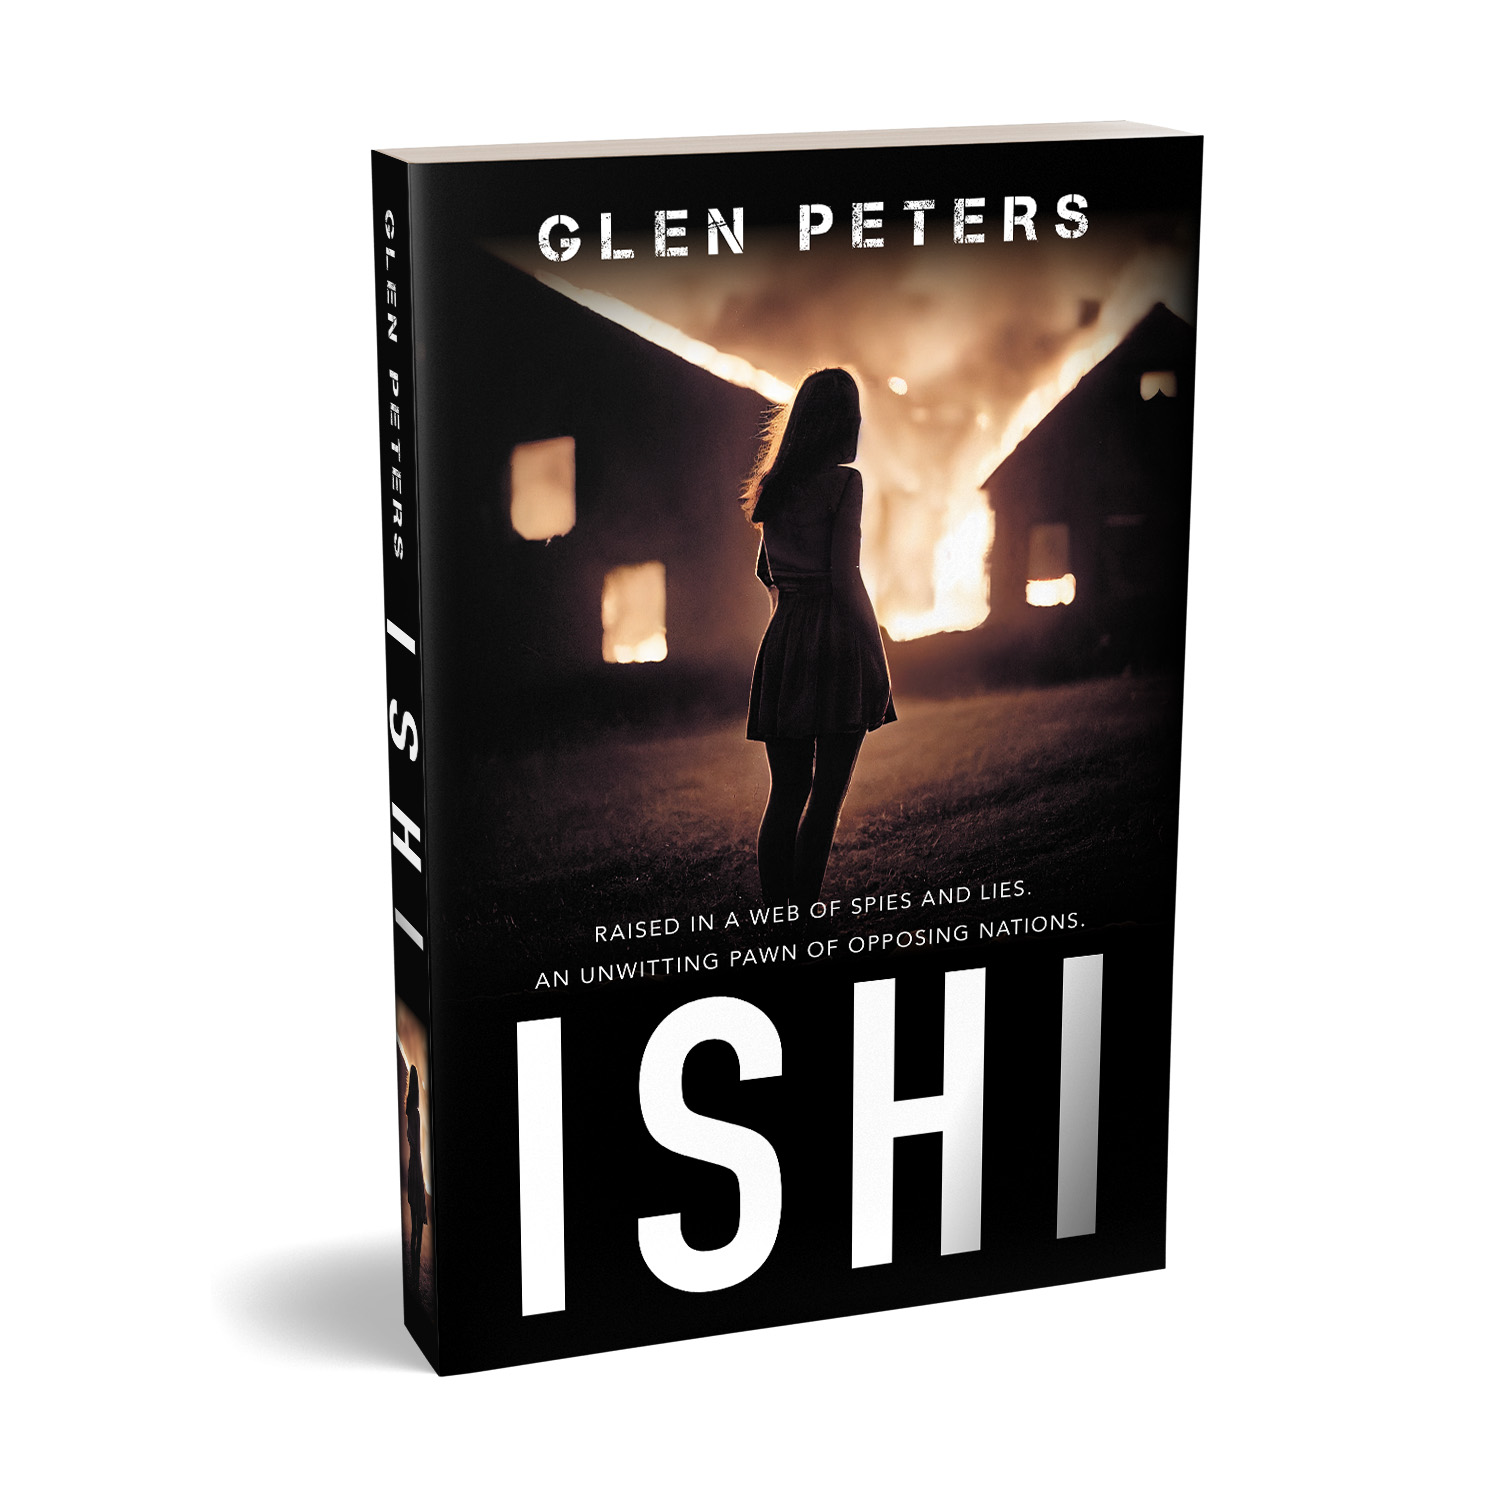 'Ishi' is a gripping modern thriller that spans from the late 1980s to the mid 2000s. The author is Glen Peters. The book cover and interior design are by Mark Thomas. To learn more about what Mark could do for your book, please visit coverness.com.